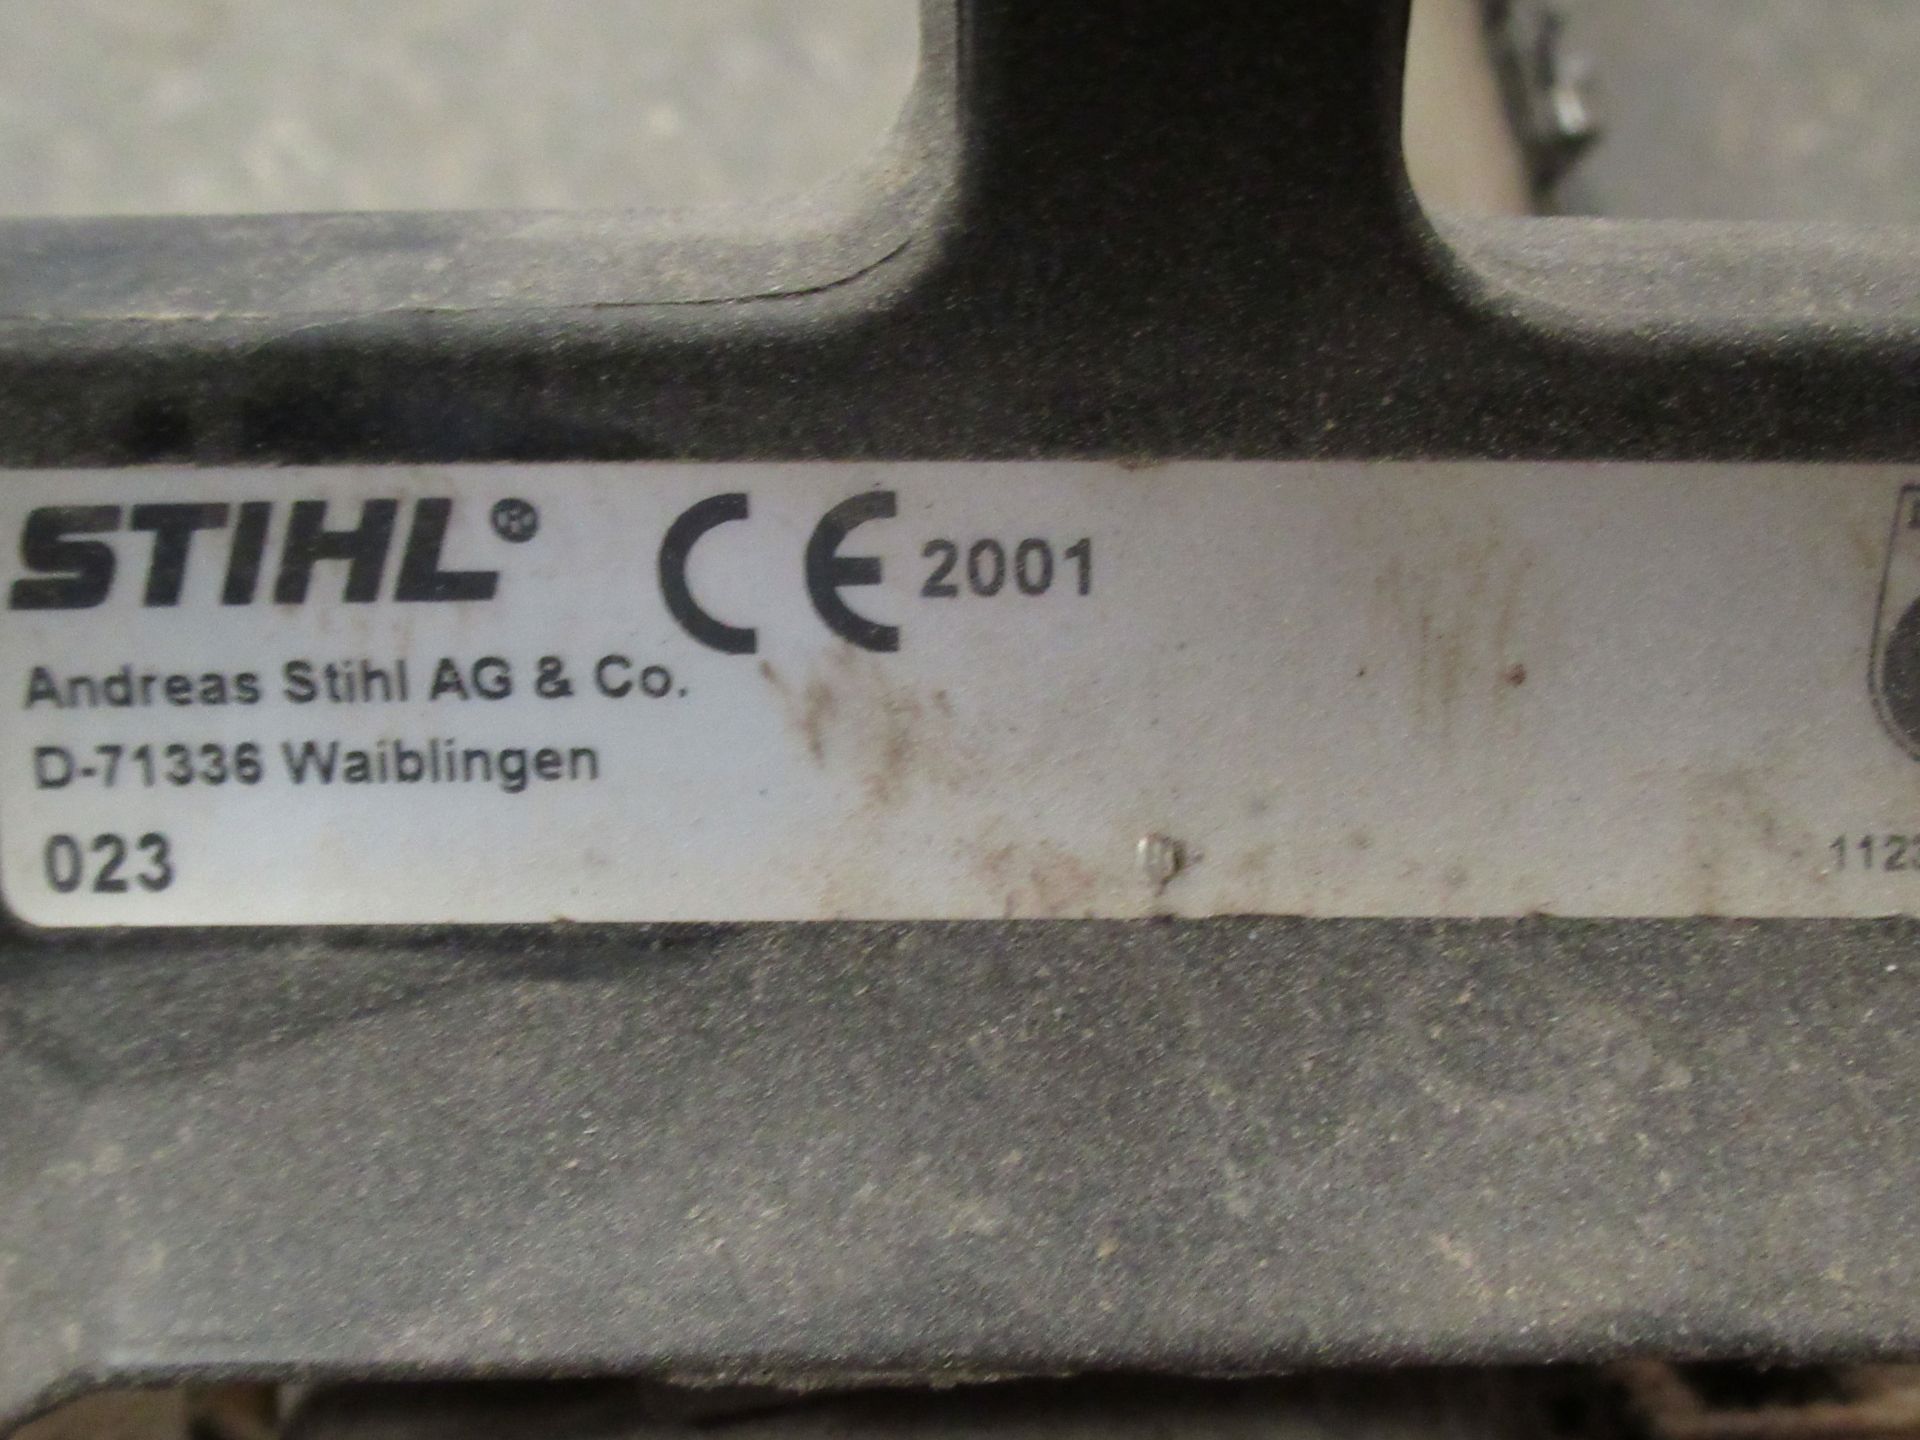 Sthl 023 Petrol Chainsaw - Image 2 of 3